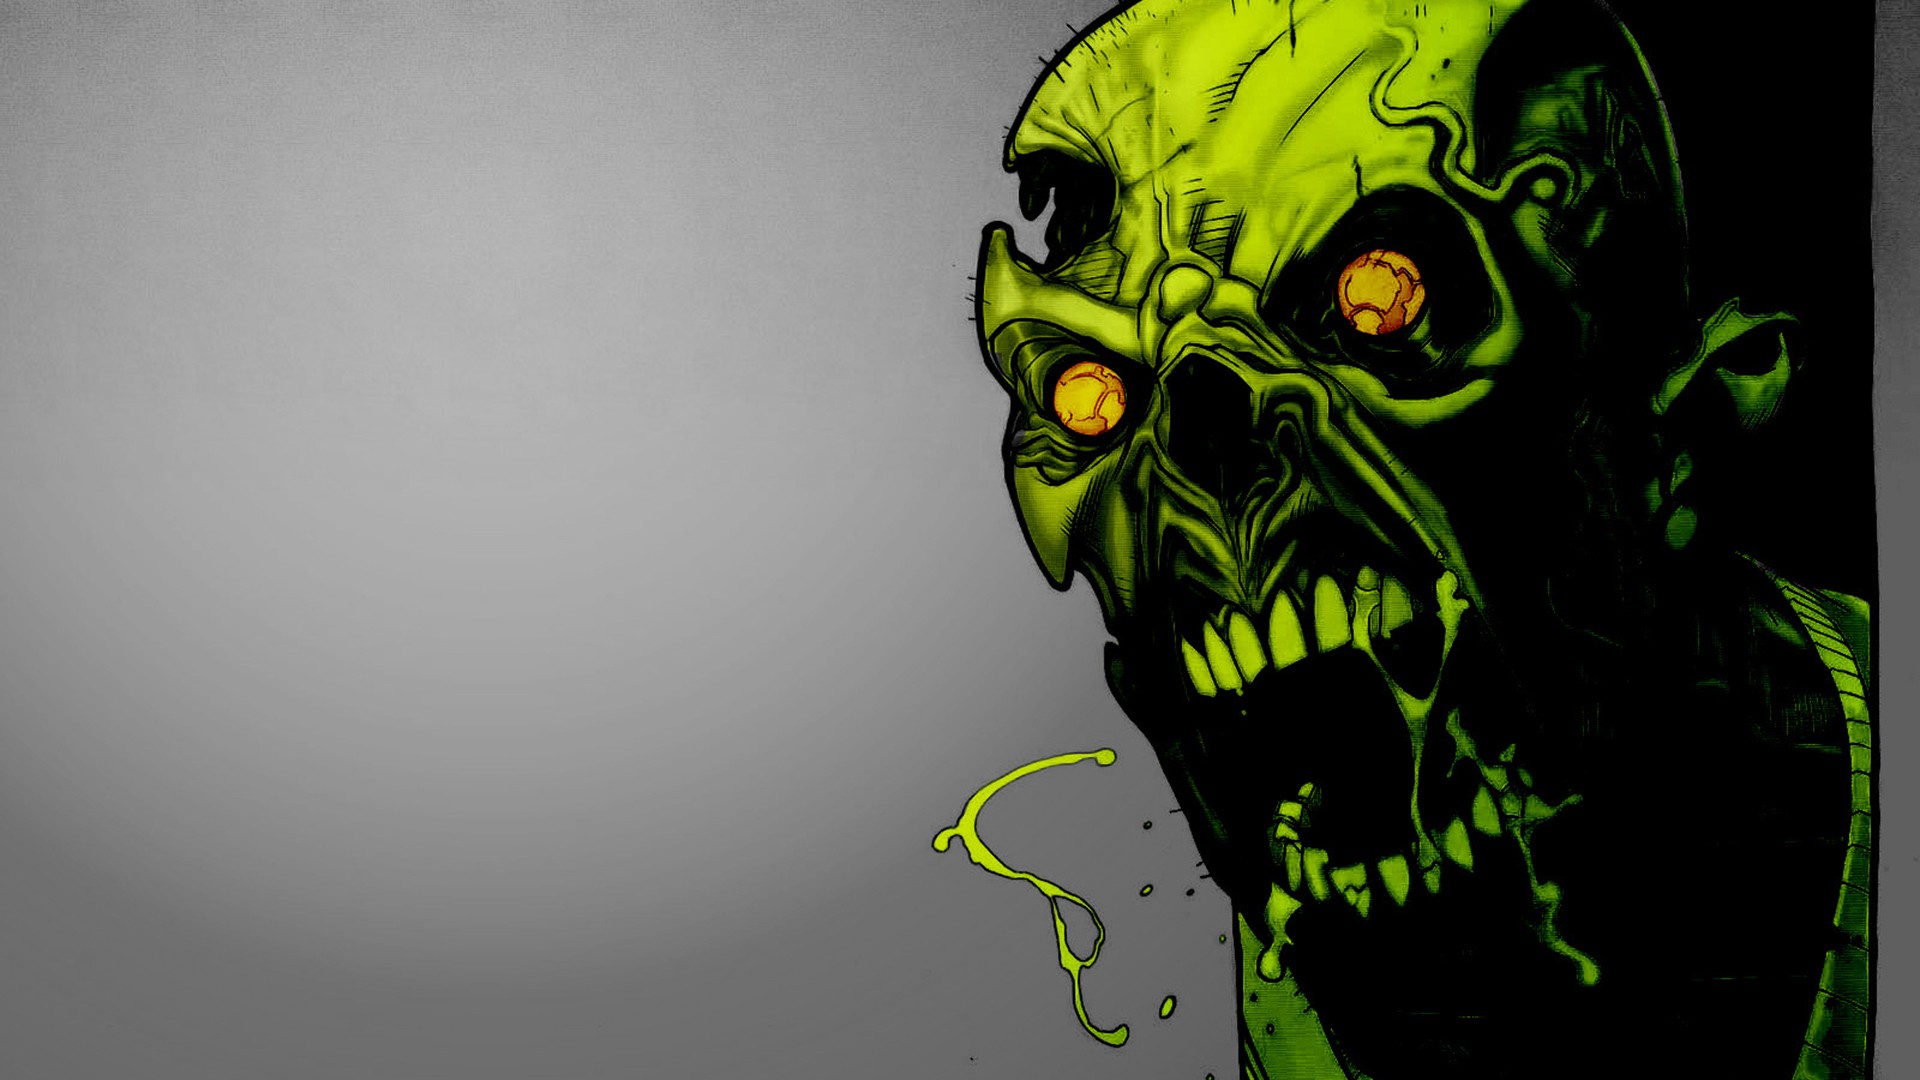 General 1920x1080 zombies undead simple background horror artwork